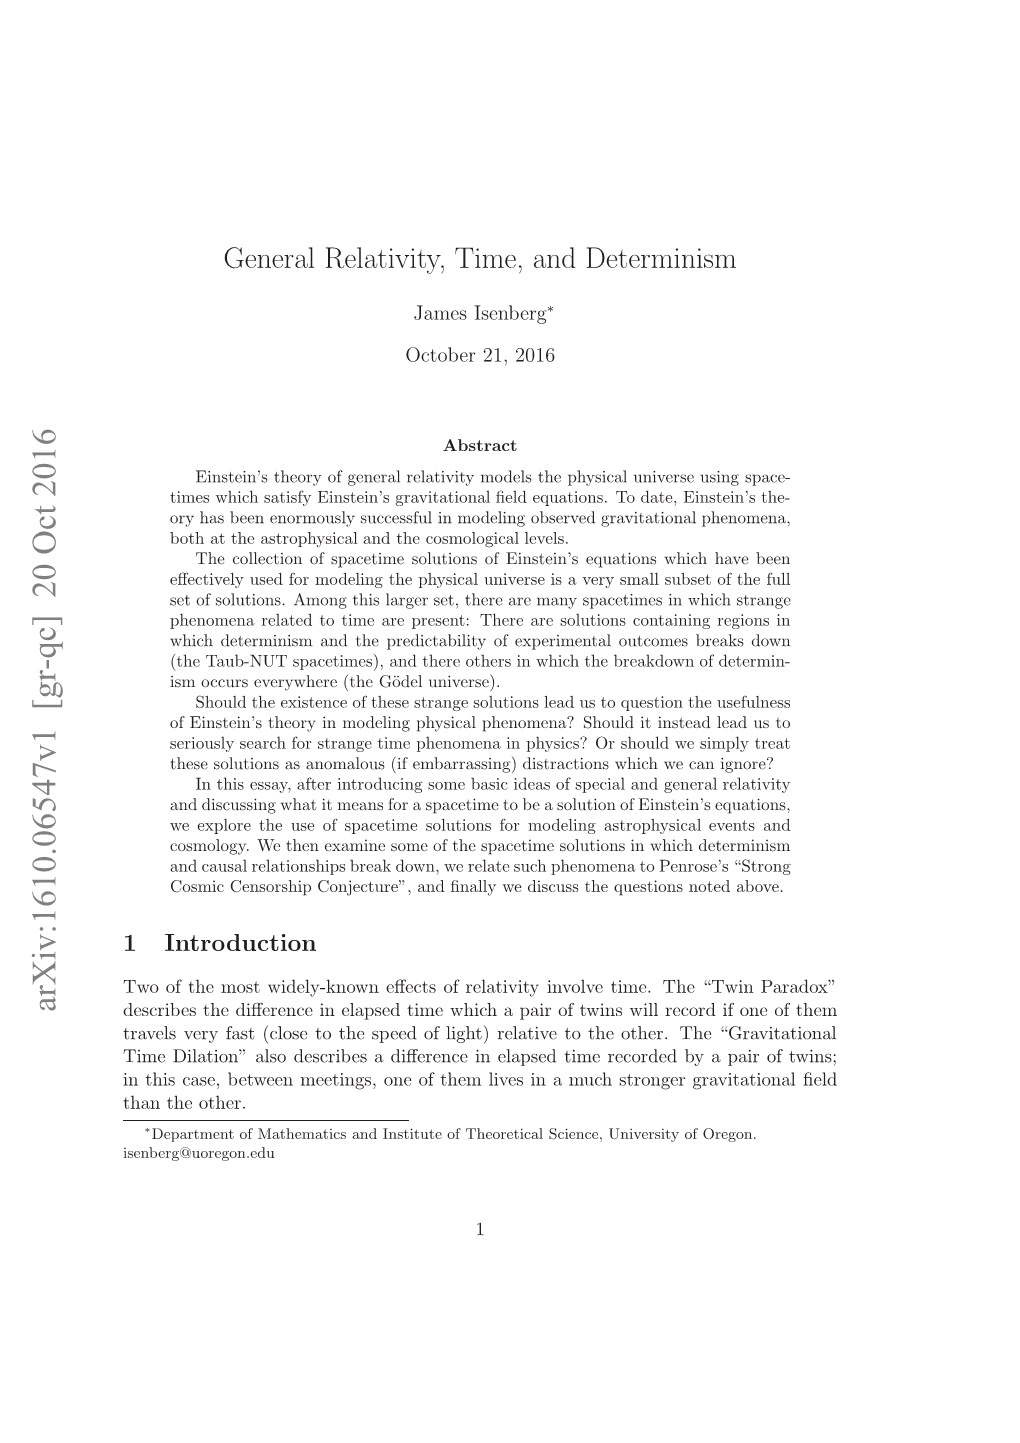 General Relativity, Time, and Determinism